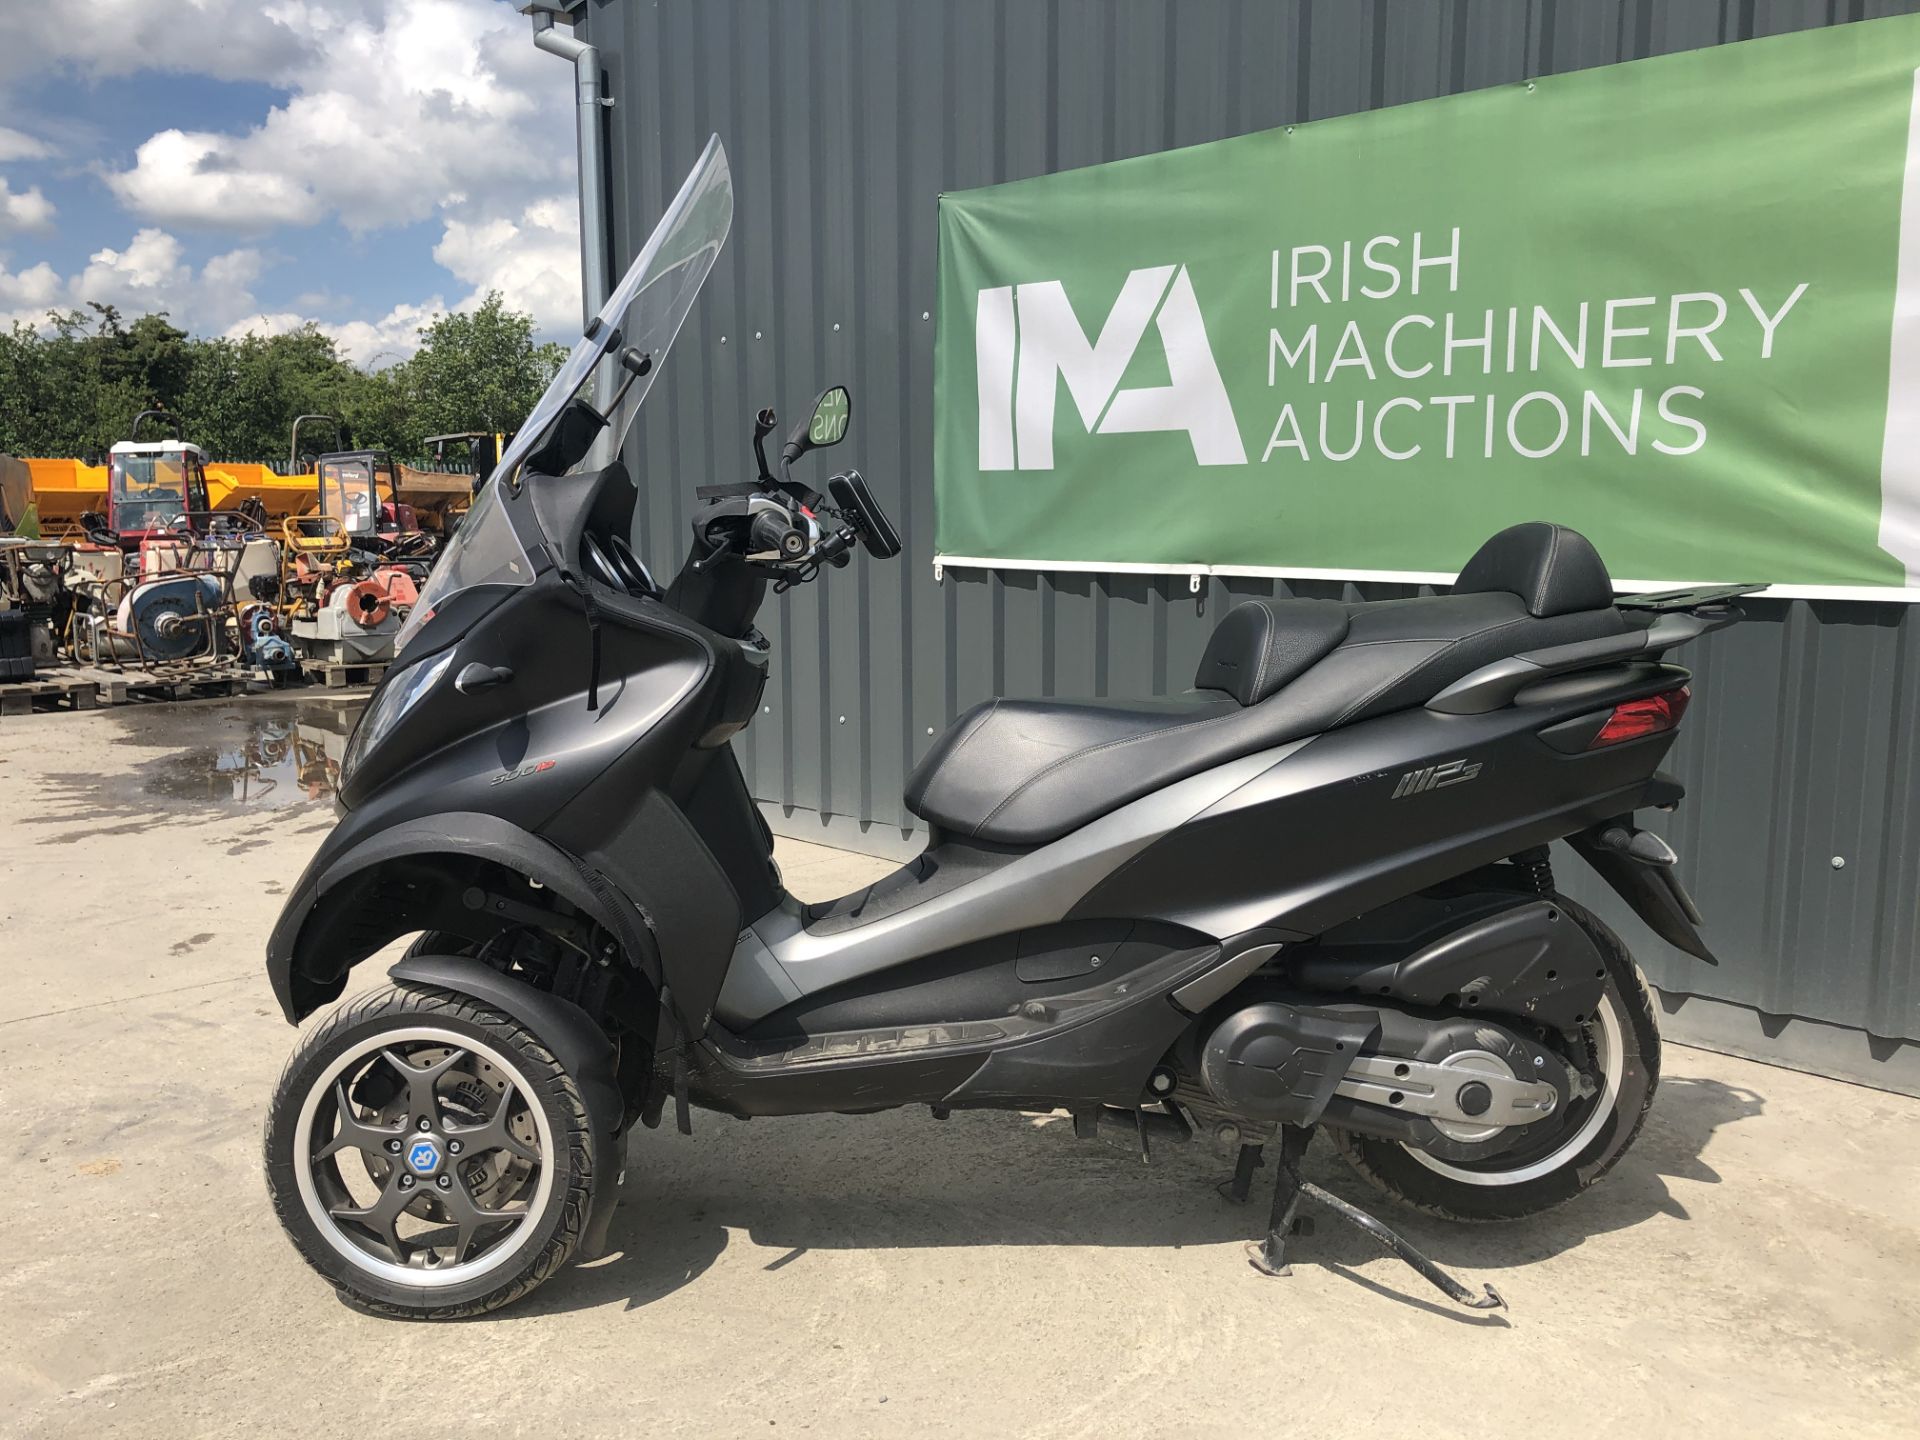 171D27114 2017 Piaggio MP3 500 LT Sport 500cc Motorcycle - Image 2 of 25